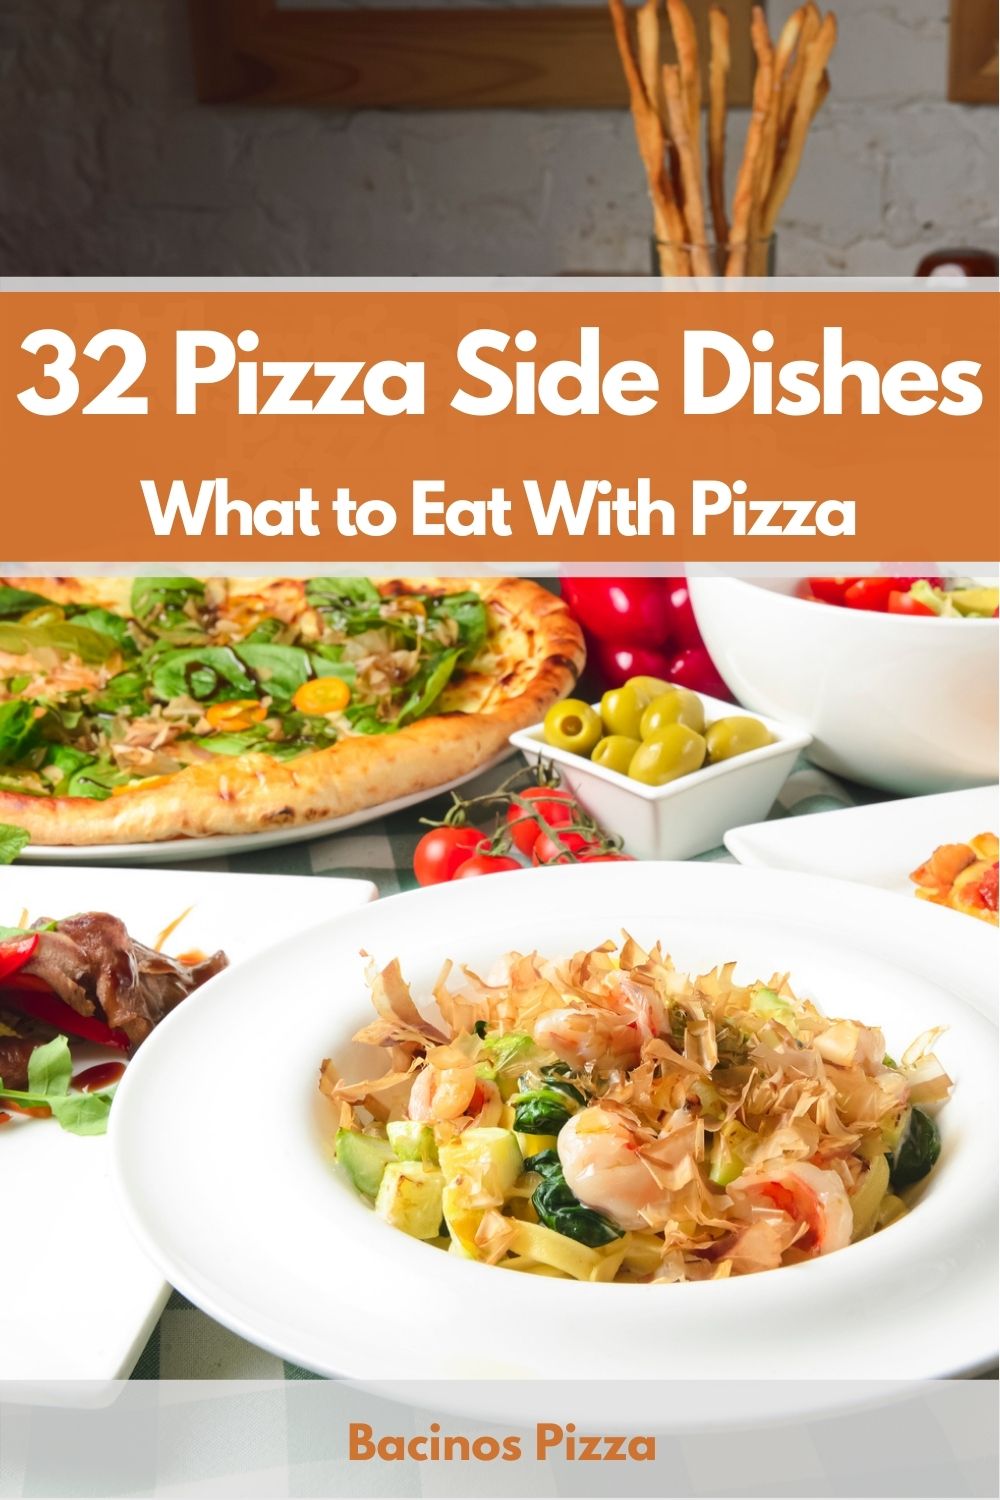 32 Pizza Side Dishes - What to Eat With Pizza pin